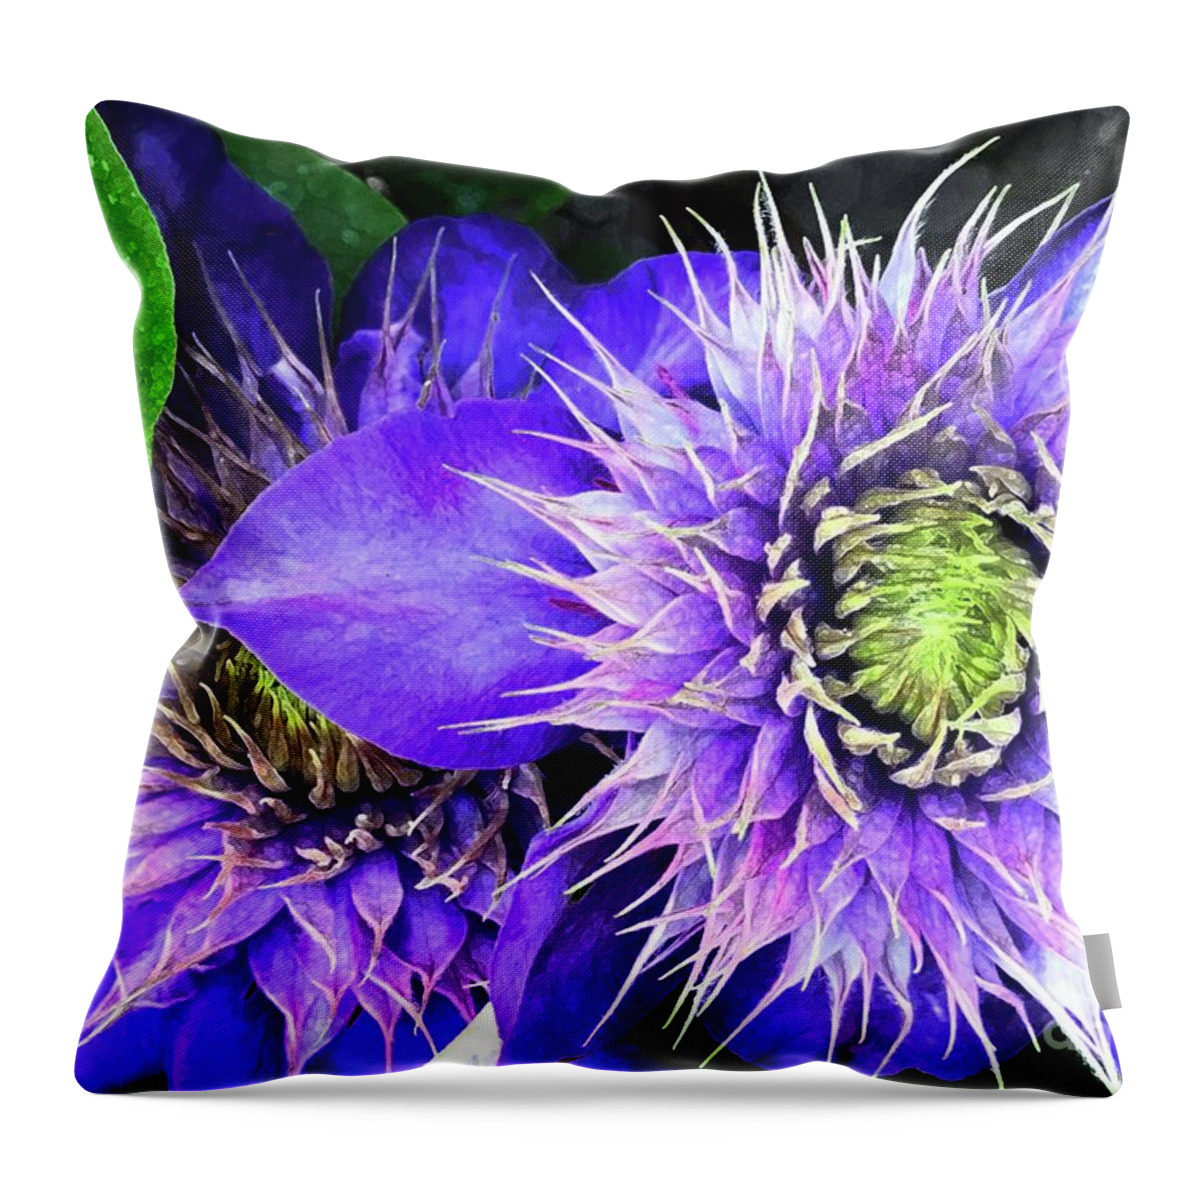 Clematis Throw Pillow featuring the photograph Clematis Multi Blue by Barbie Corbett-Newmin